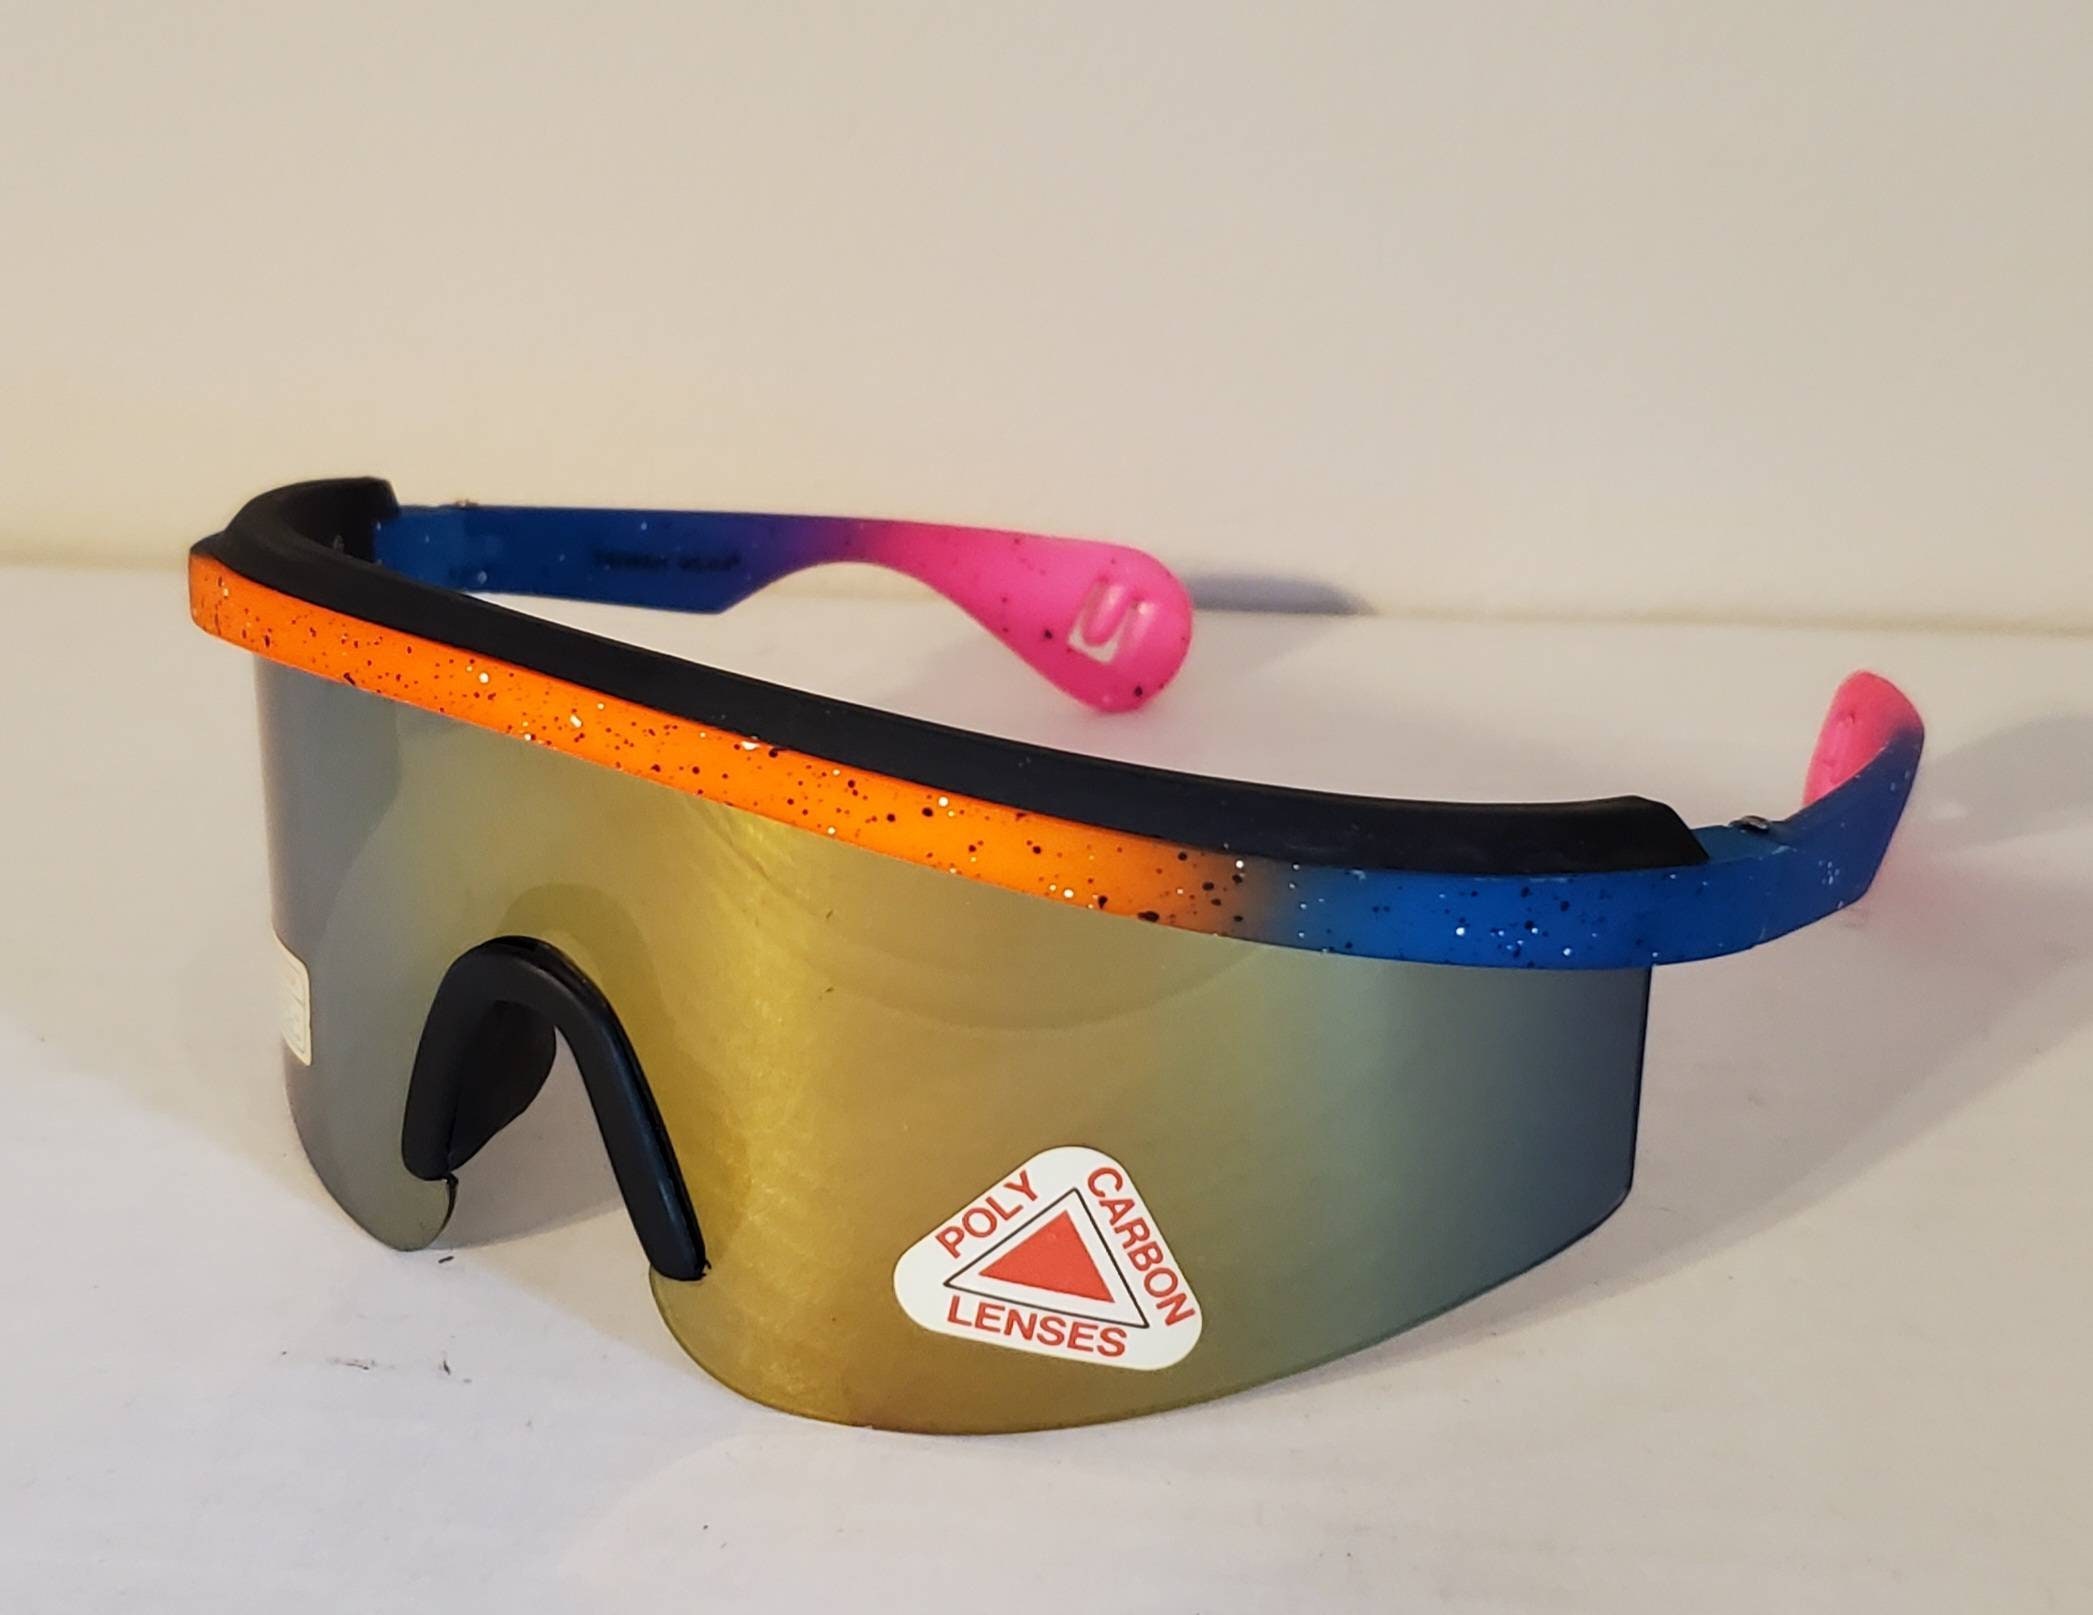 Festival 90s // 80s Colorful // Vintage Etsy Sports Shield Party Sports Big // From NOS - Retro // Rave Blade VTG Sunglasses Multicolor Shades